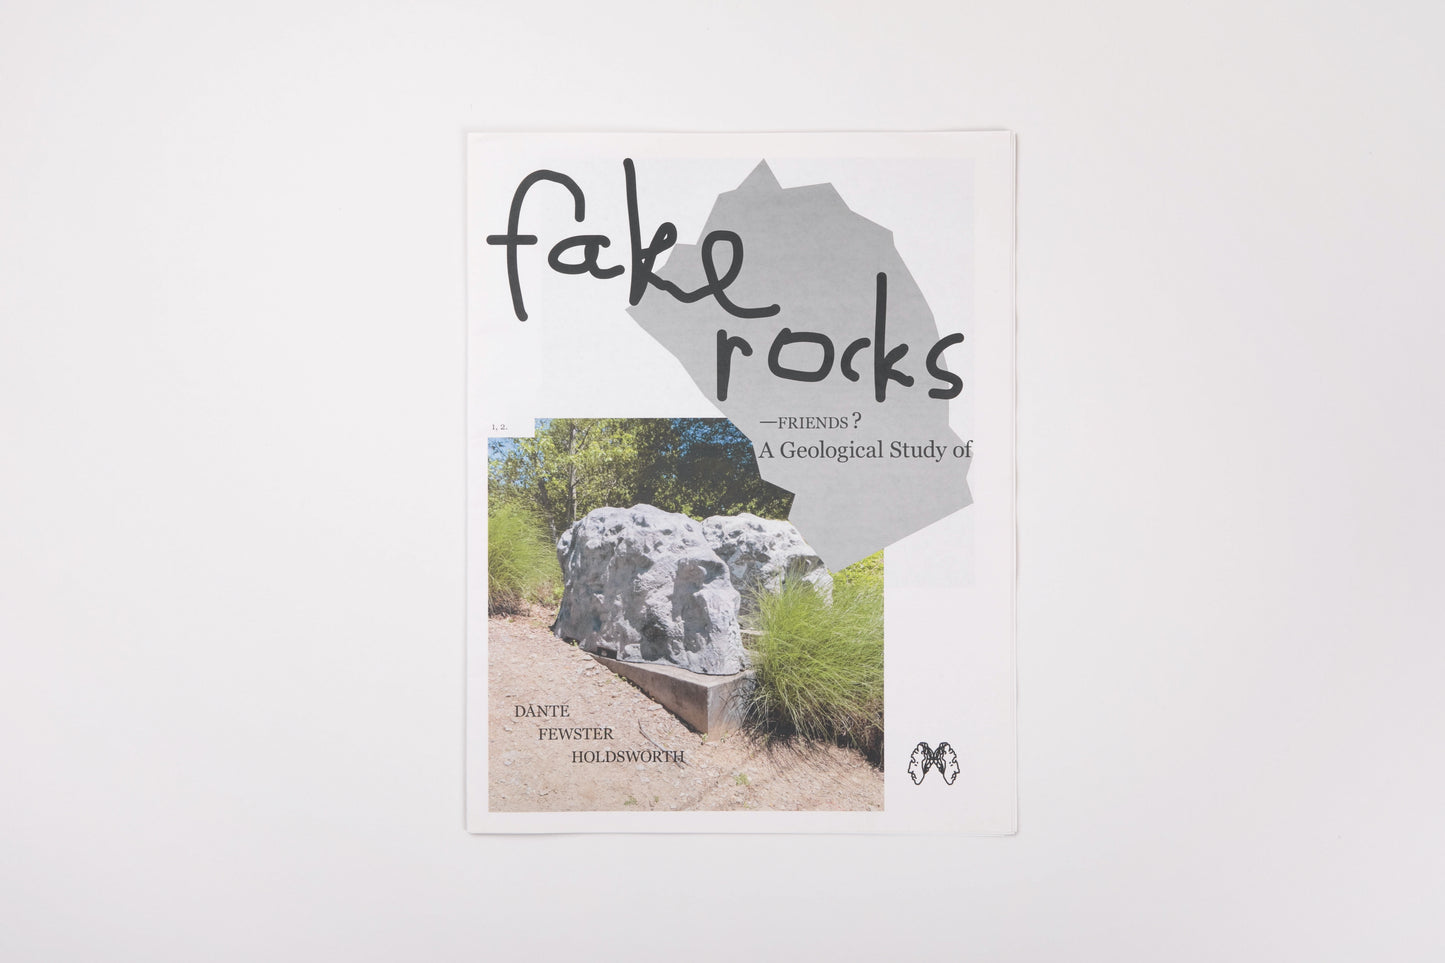 Fake rocks - Friends? A Geological Study of